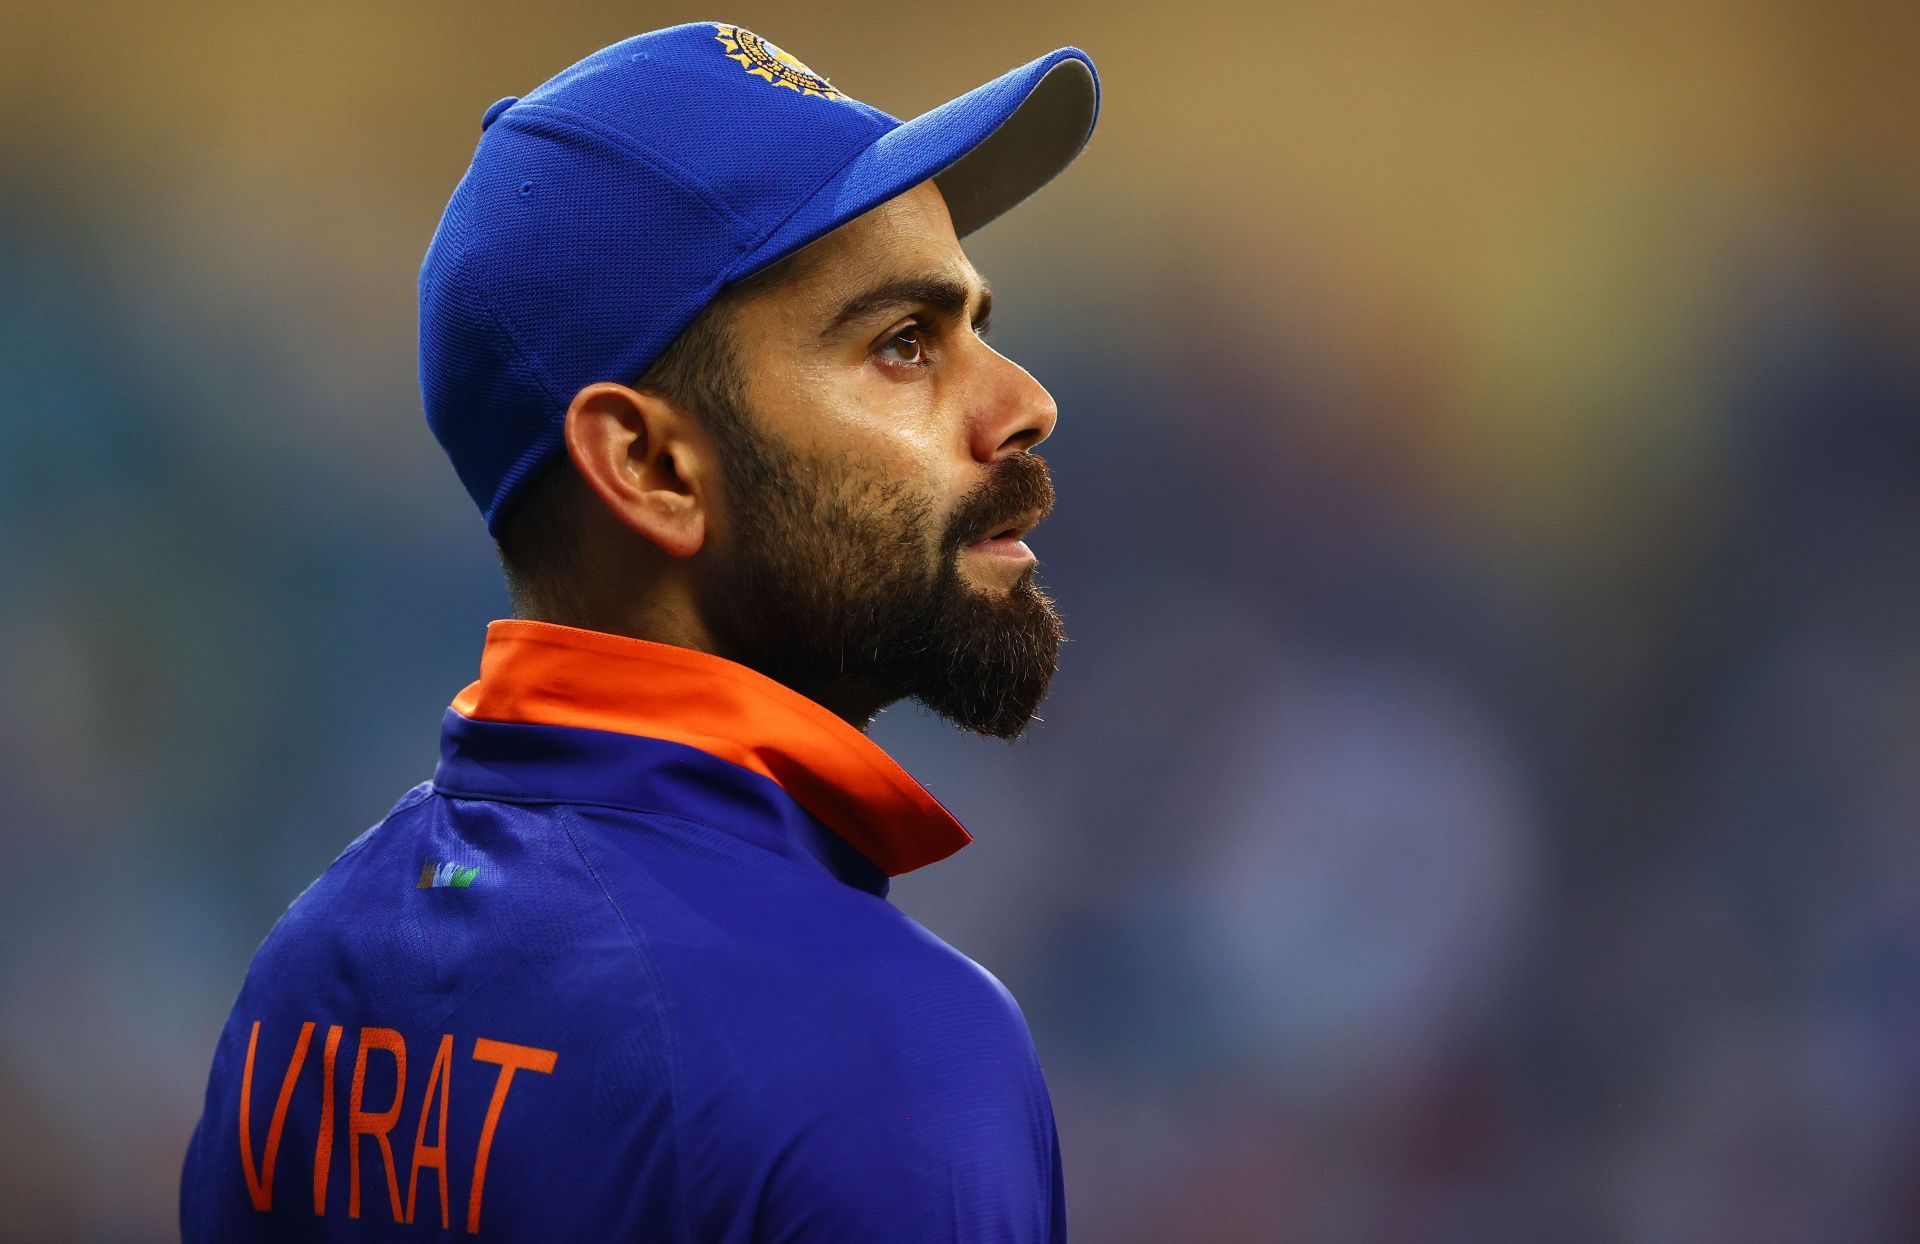 Virat Kohli is going through the leanest phase of his career with the bat. Pic: Getty Images